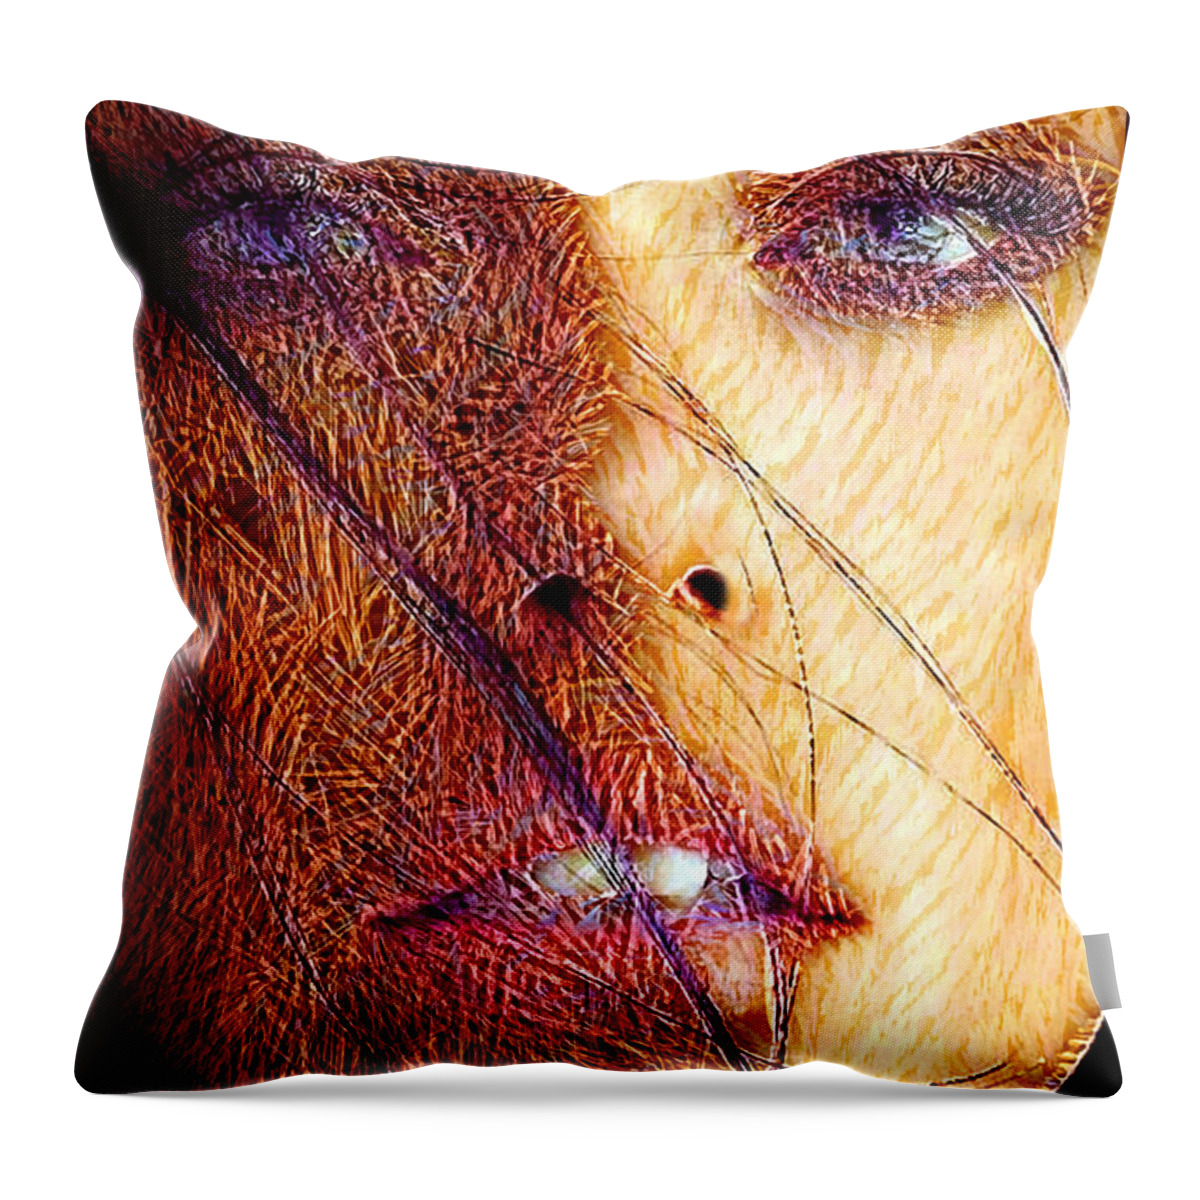 Portraits Throw Pillow featuring the digital art My Favorite Immigrant from the Planet of NFT by Rafael Salazar